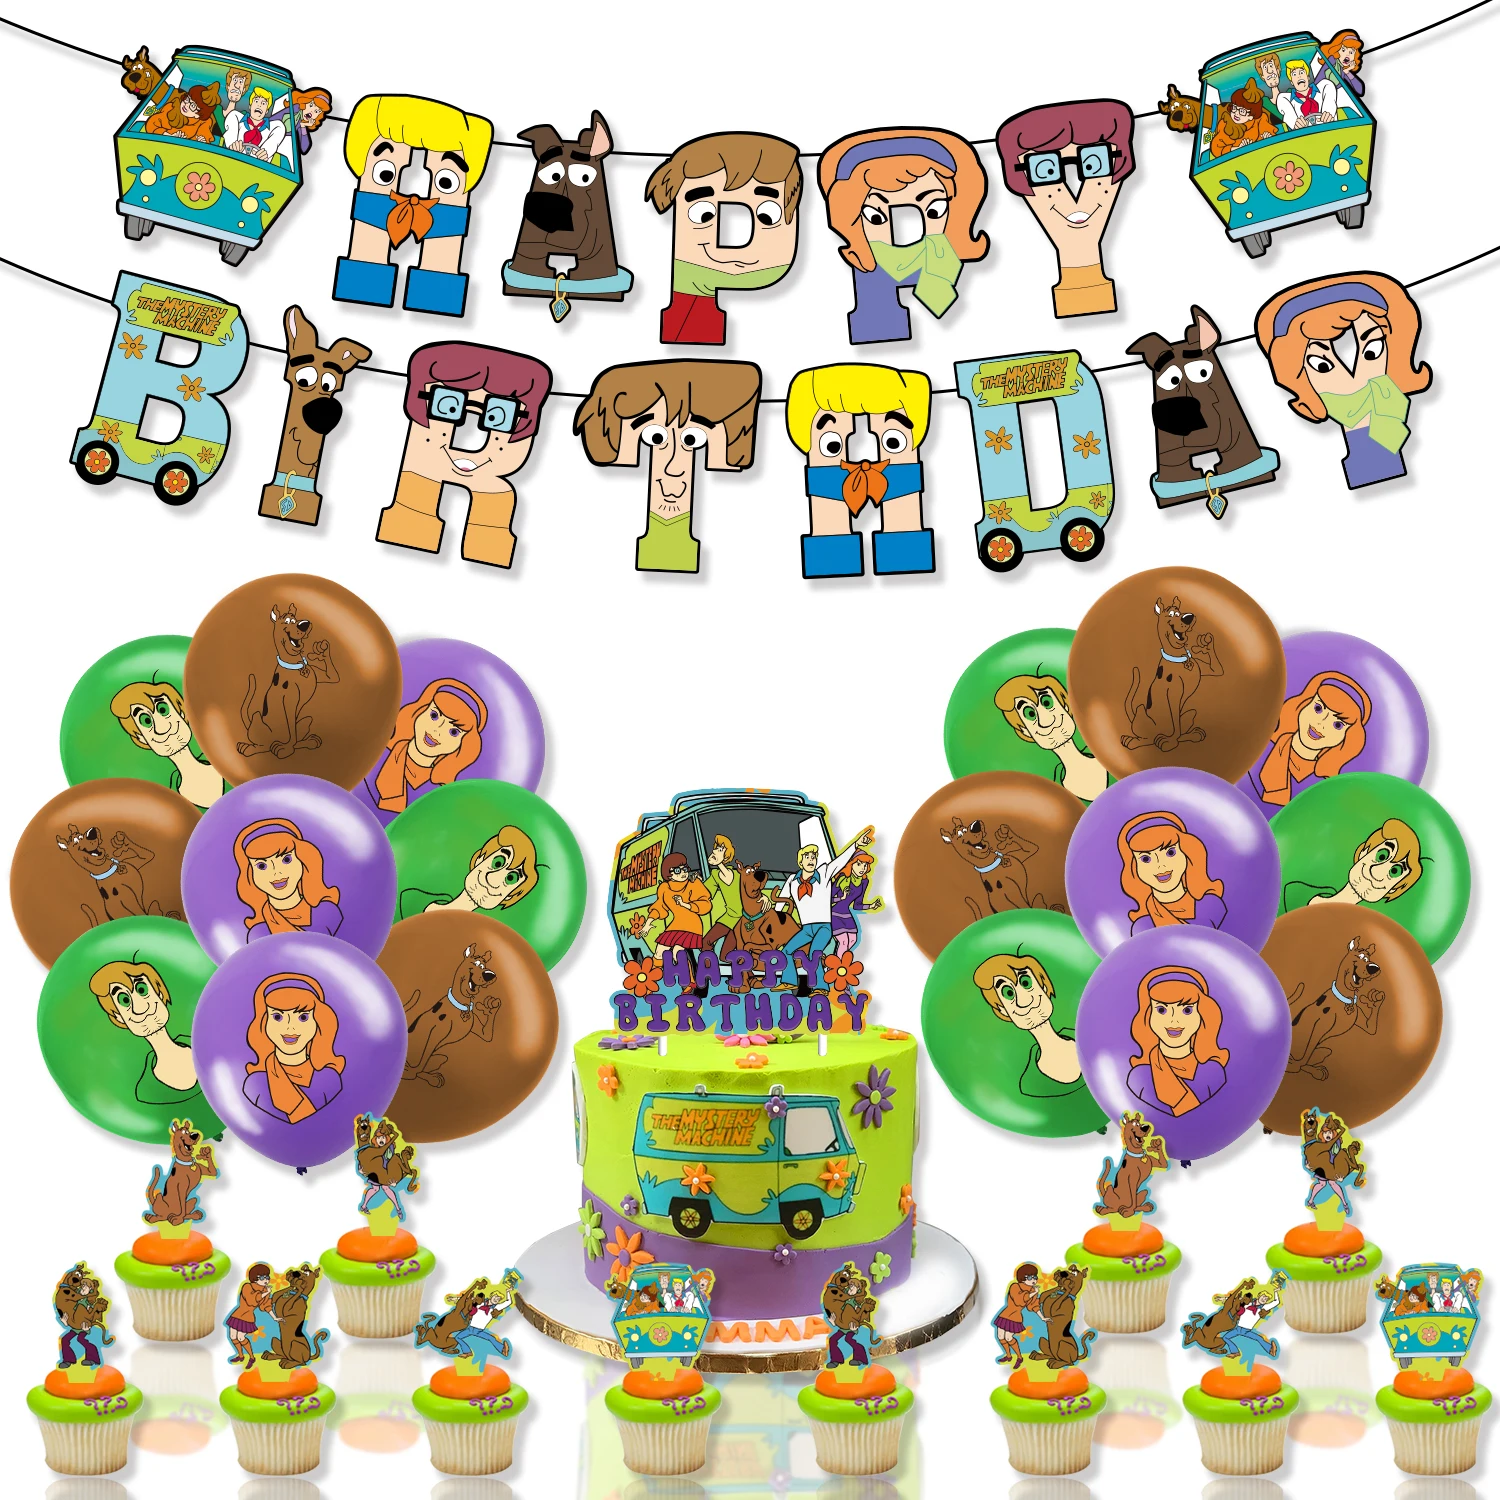 Scoo by Dog Theme Party Decorations Banner Ballons Caketopper Boy Cartoons birthday Party suit supplies Toys Favor